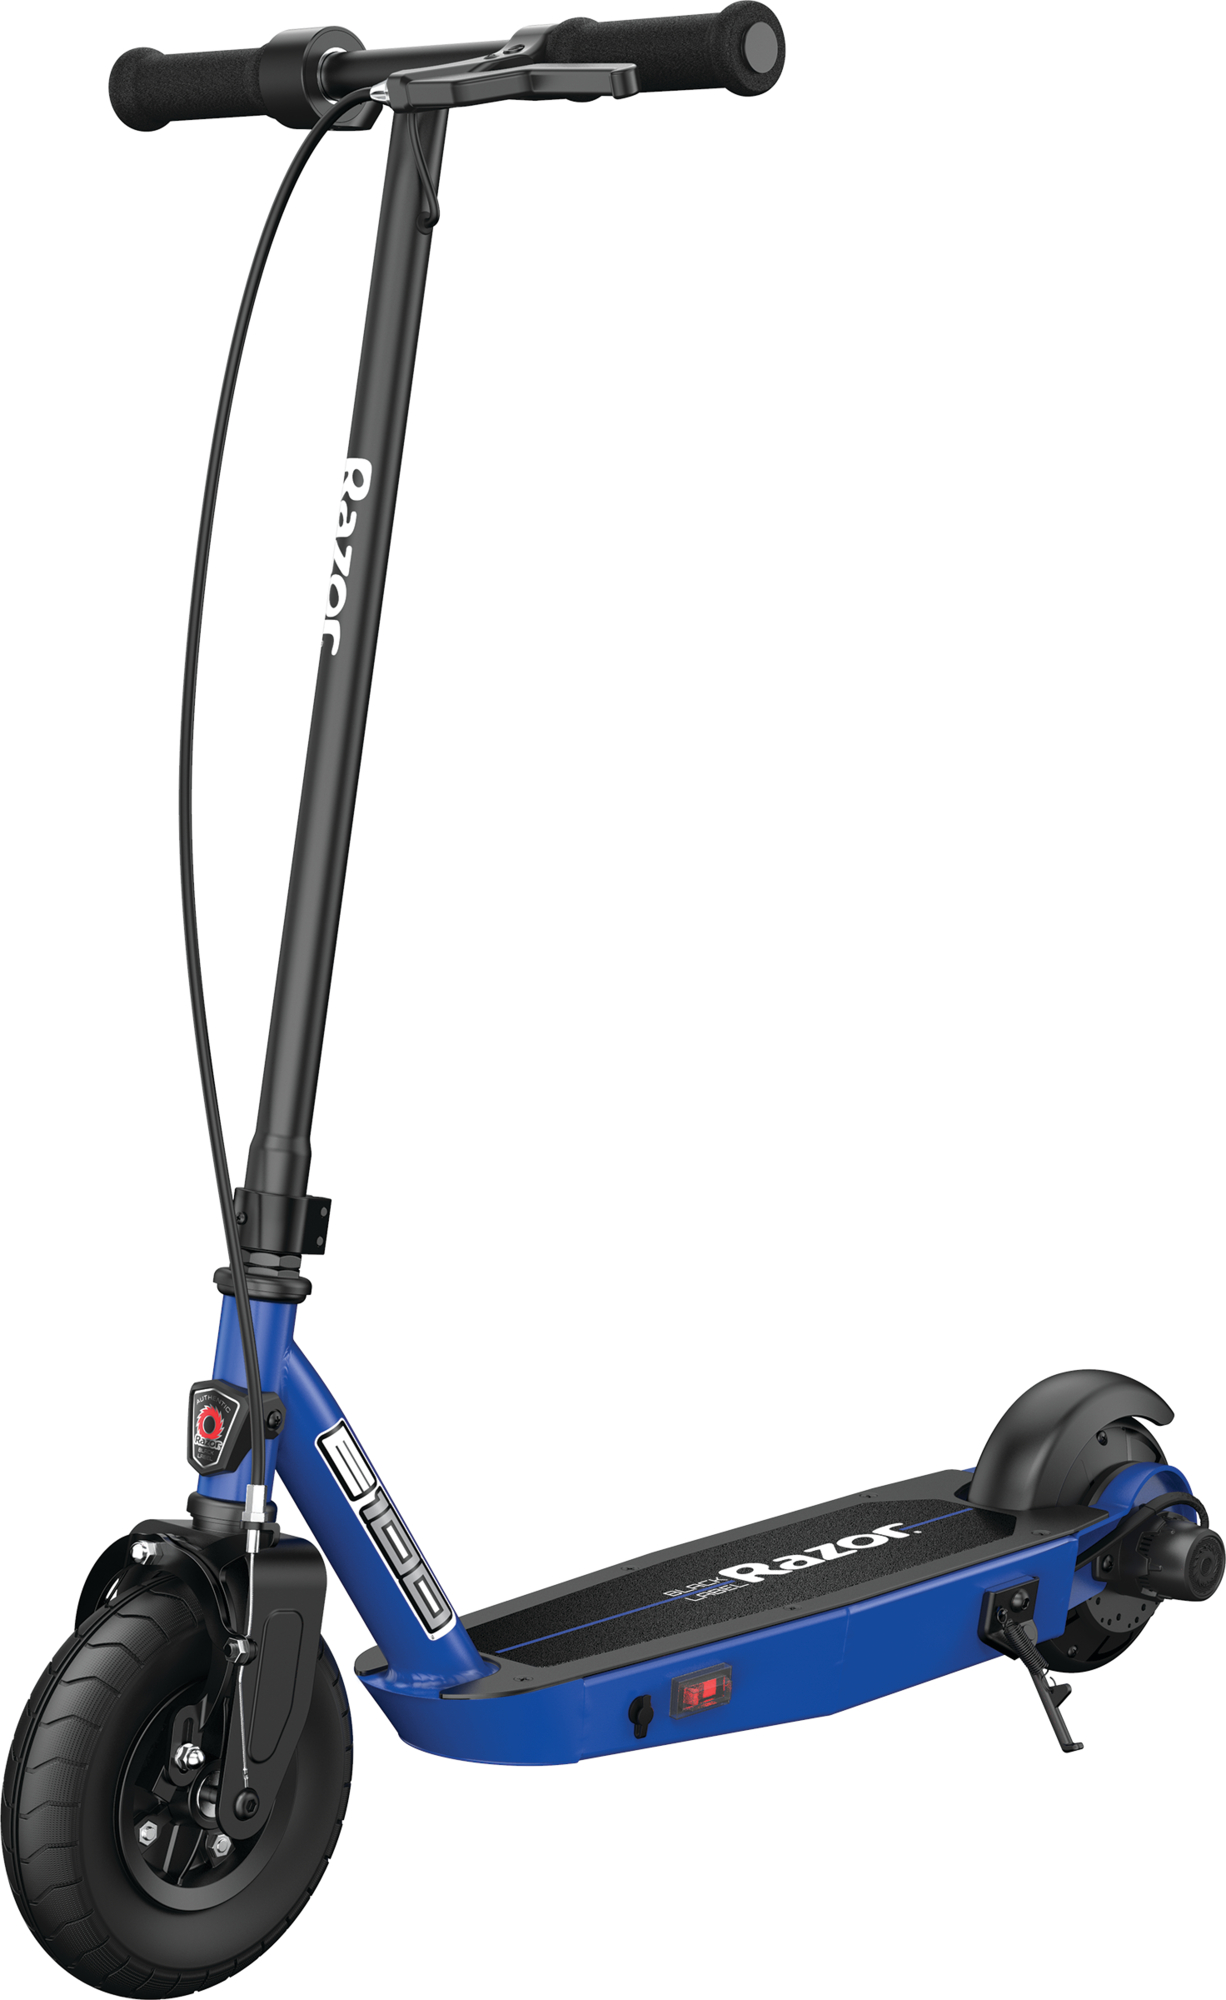 Razor Black Label E100 Electric Scooter – Blue, up to 10 mph, 8" Pneumatic Front Tire, for Kids Ages 8+ - image 1 of 14